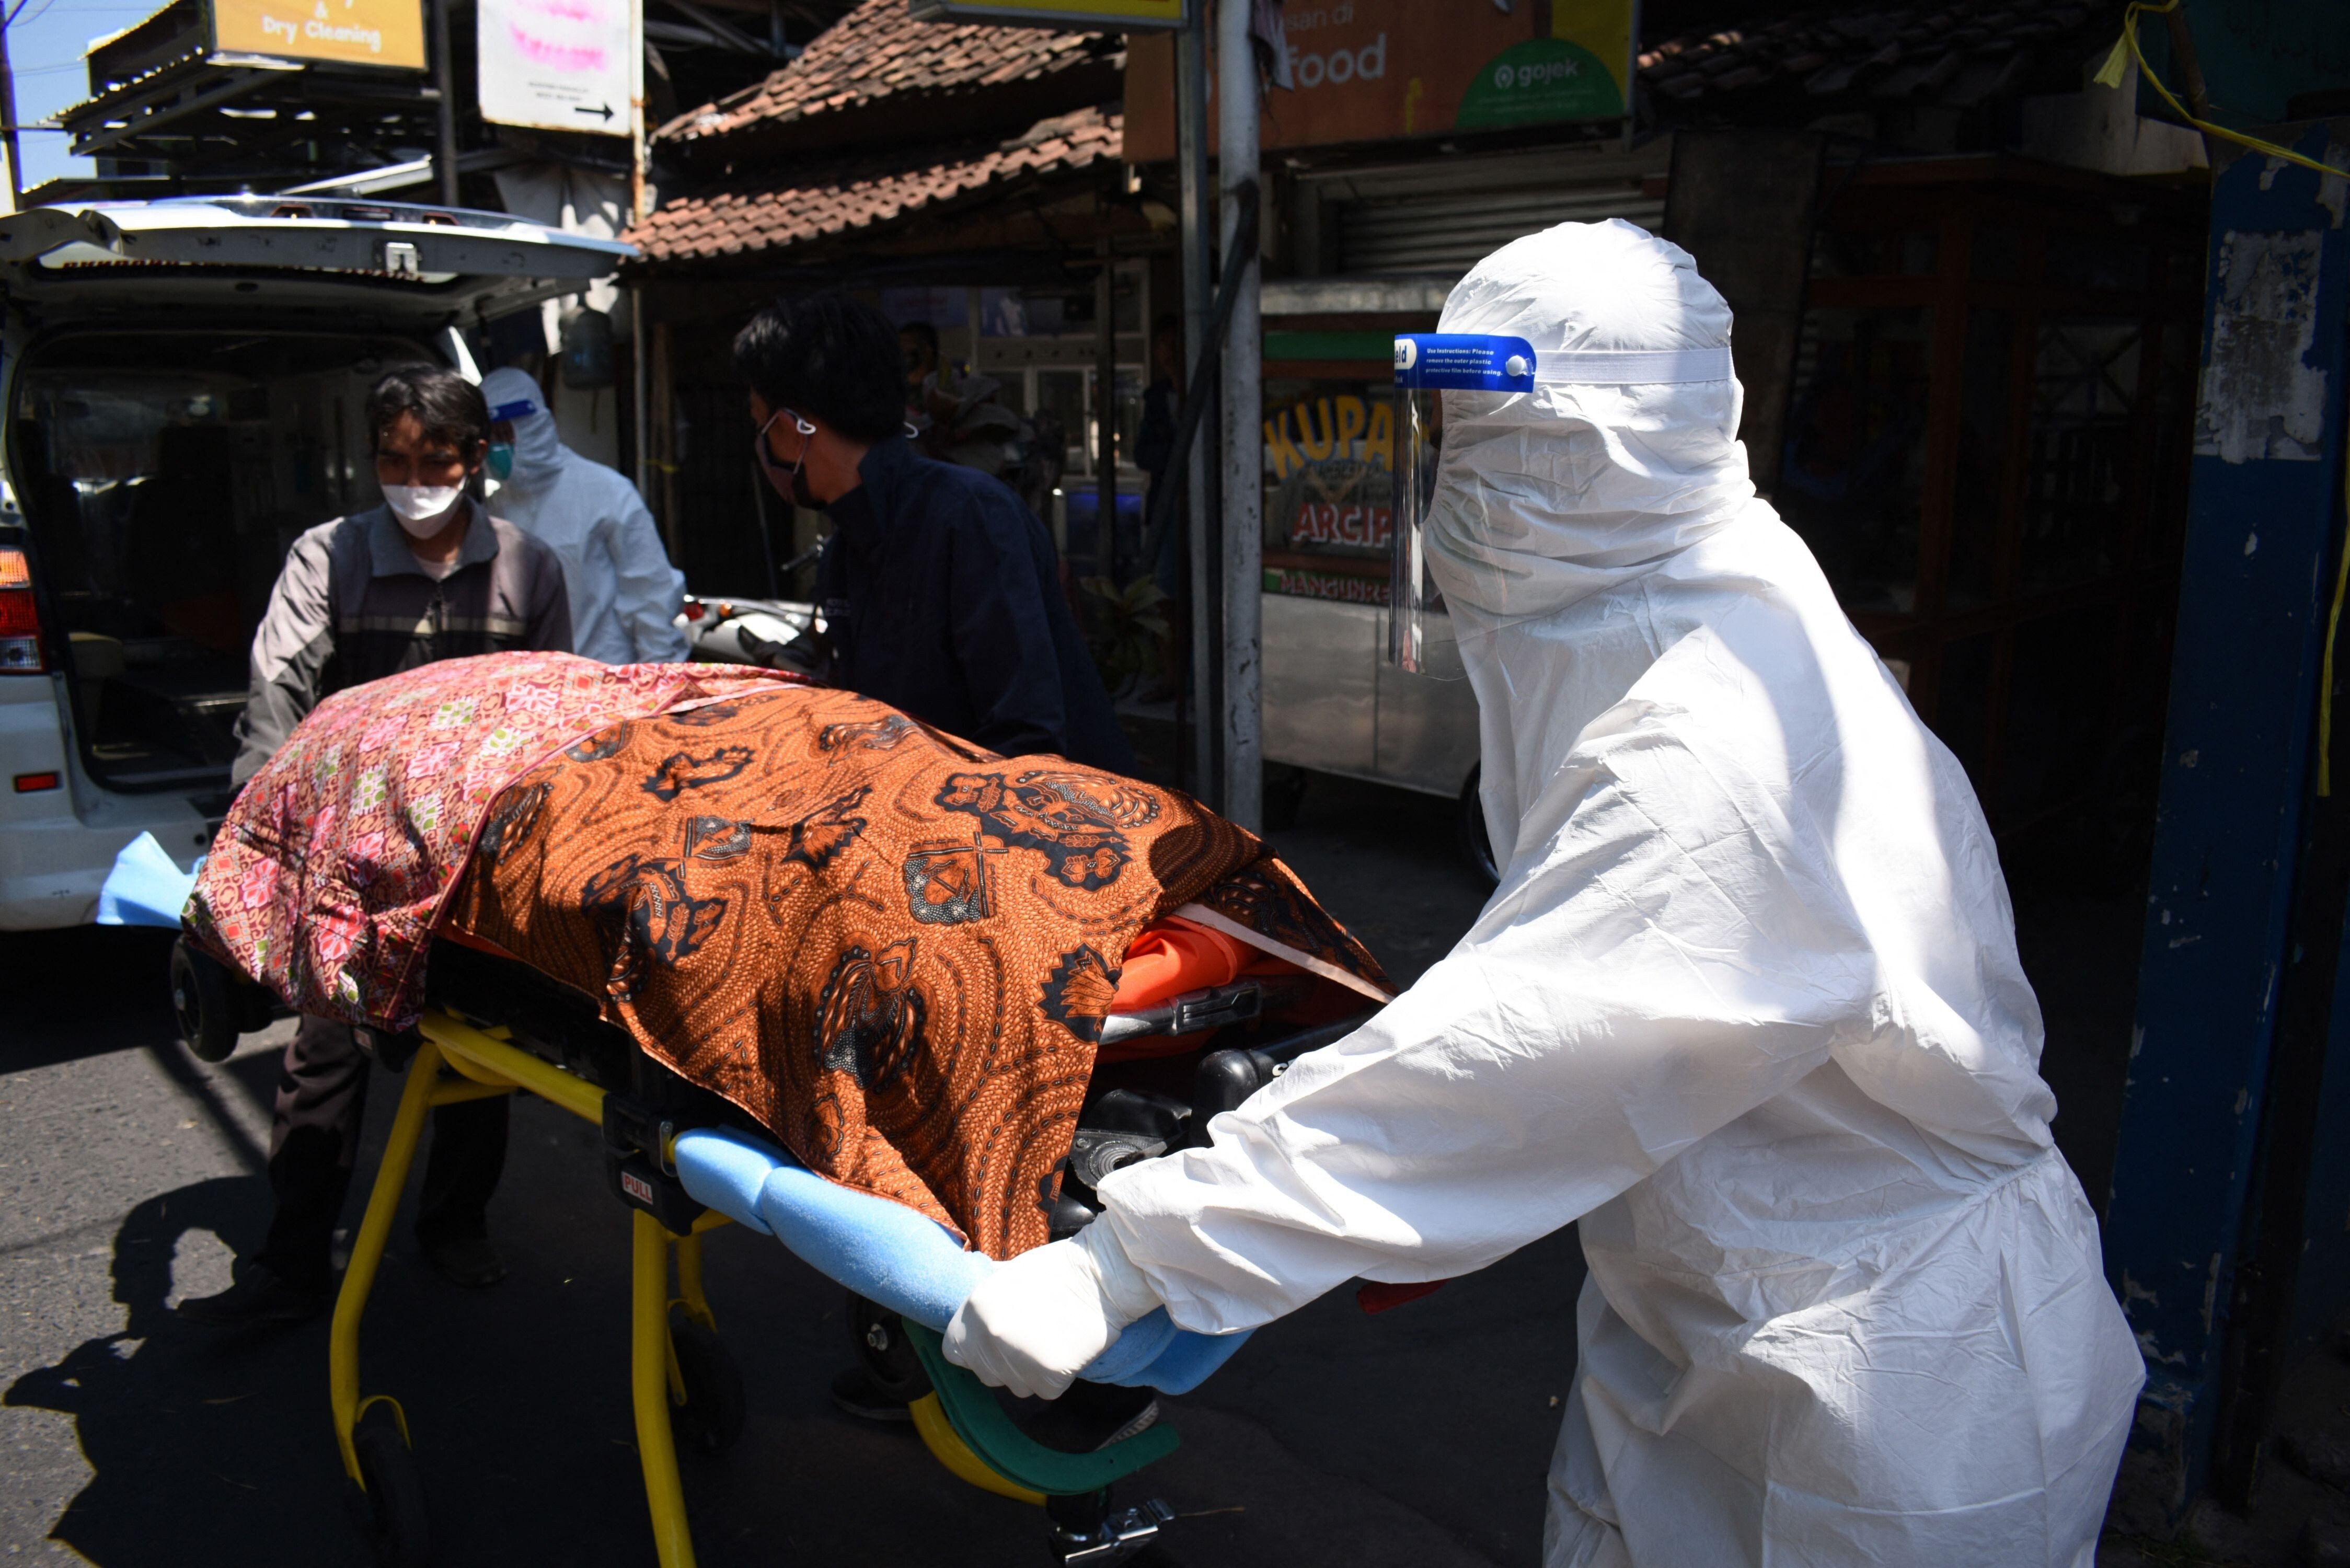 Health workers remove the body of a Covid-19 victim who died while isolating at home in Bandung, Indonesia. Photo: AFP